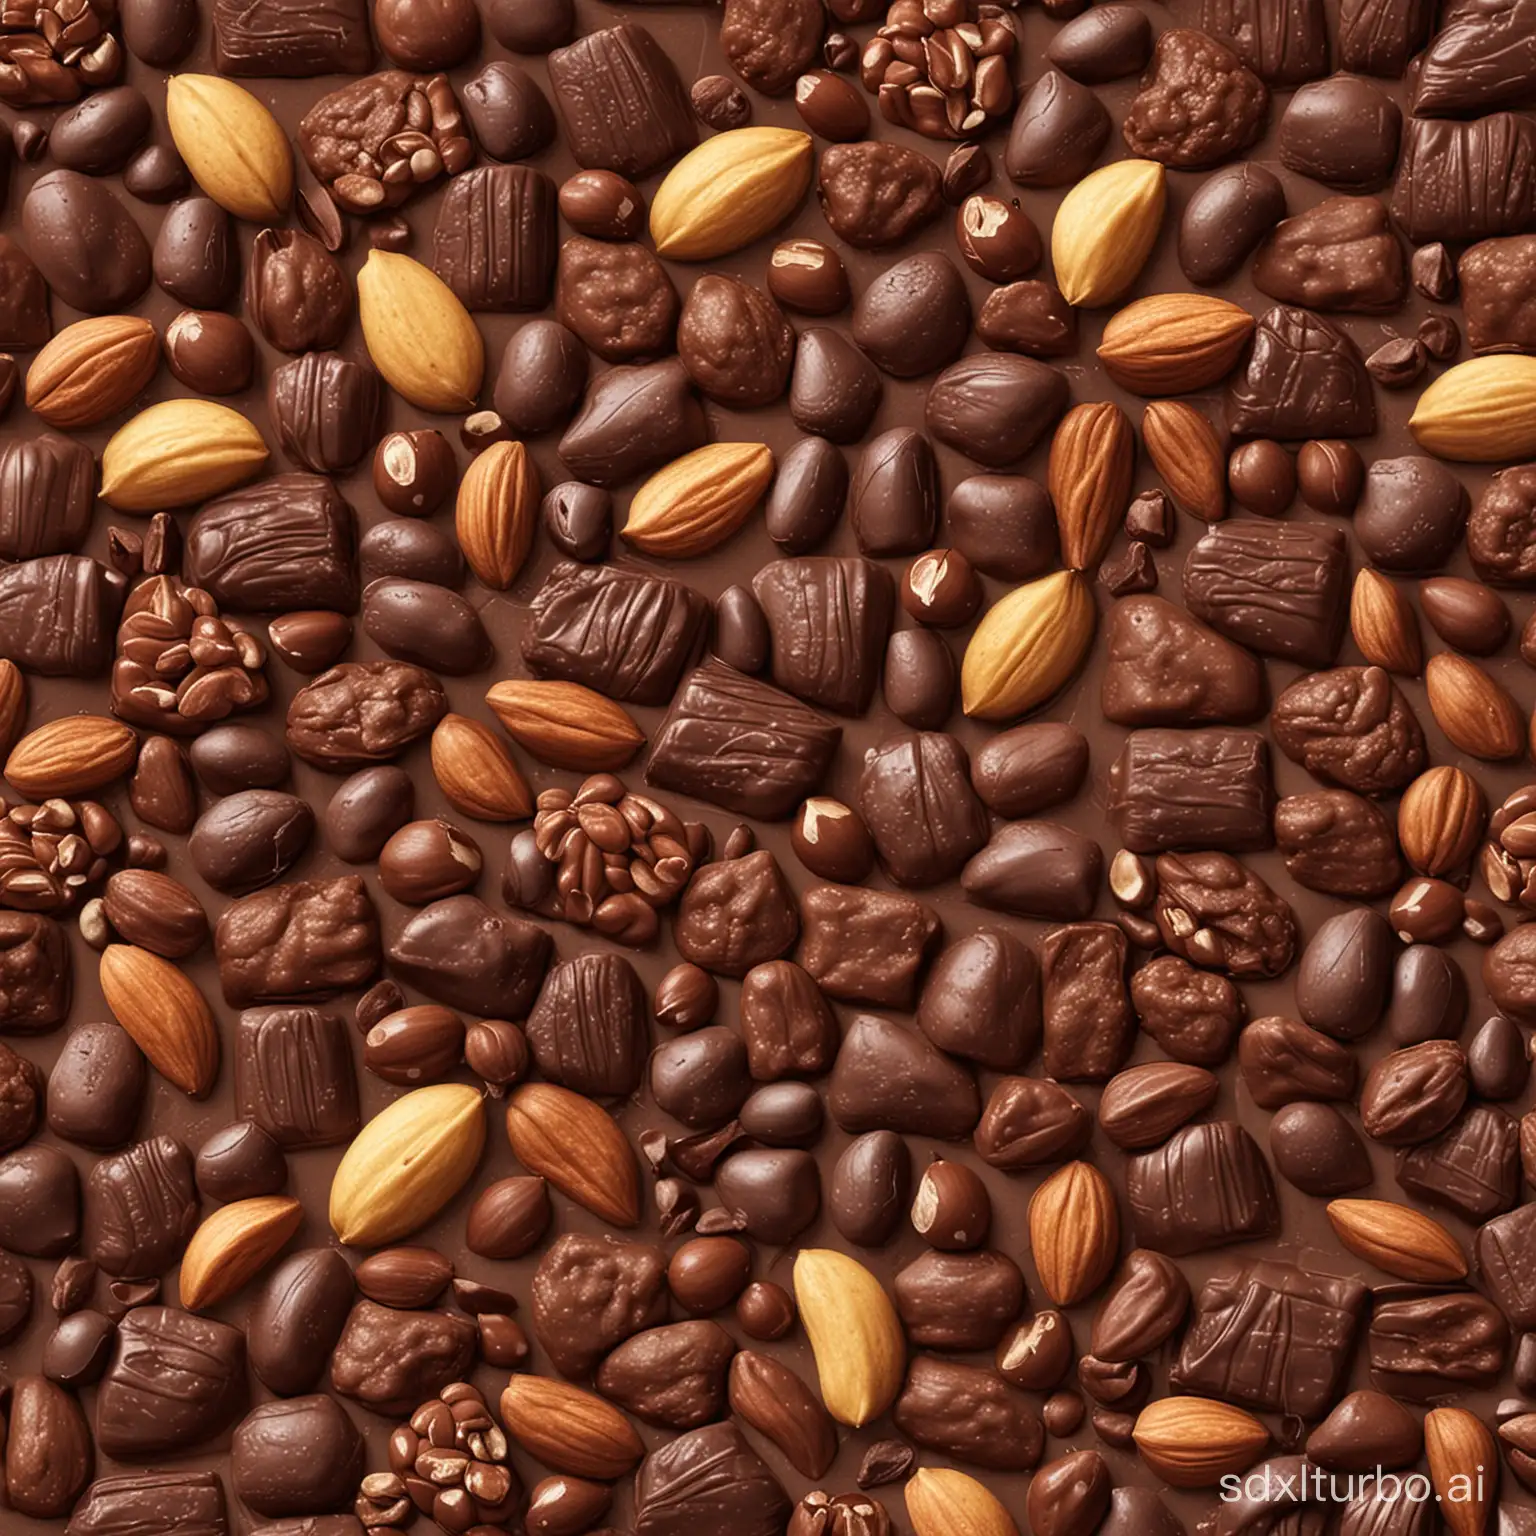 Chocolate package texture with fruit and nuts